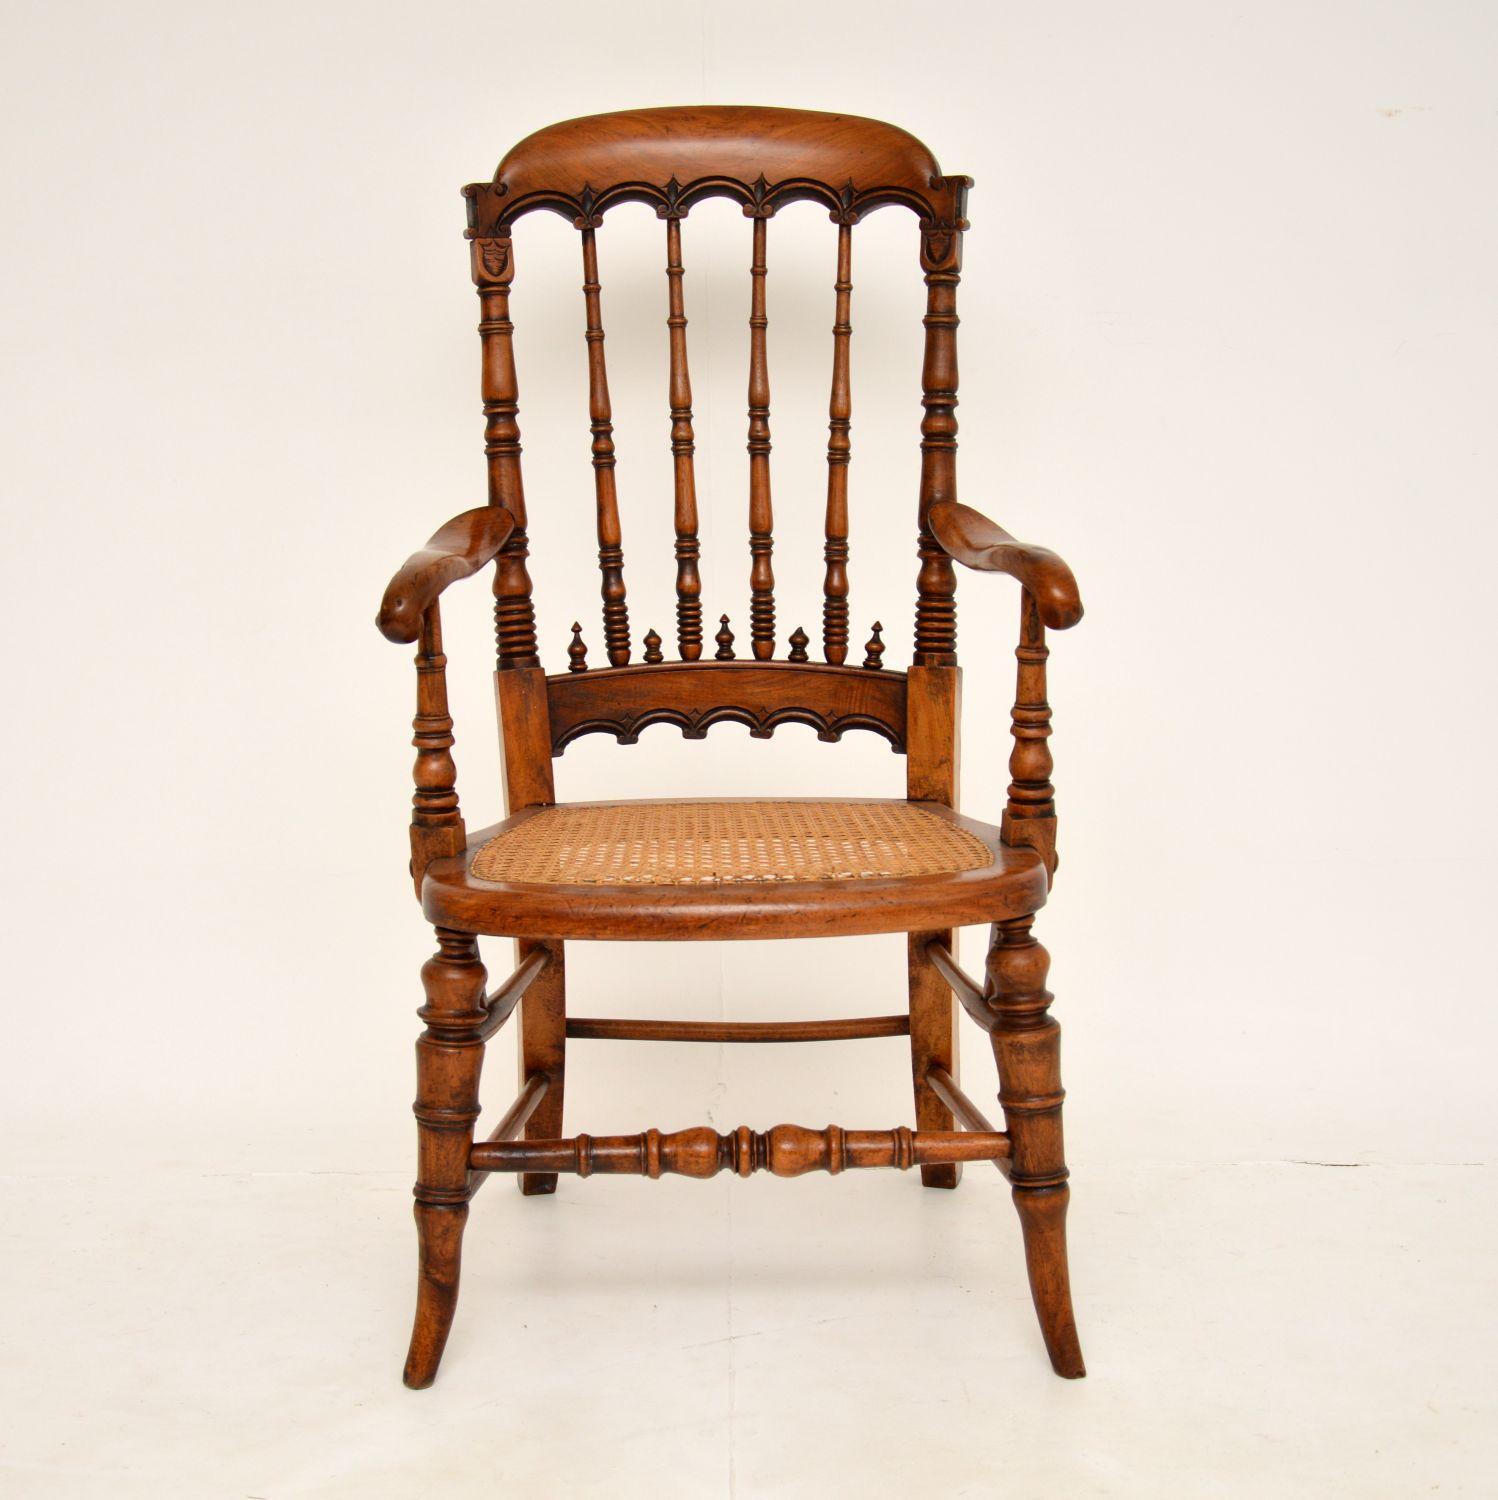 English Antique Victorian Carved & Cane Seated Armchair